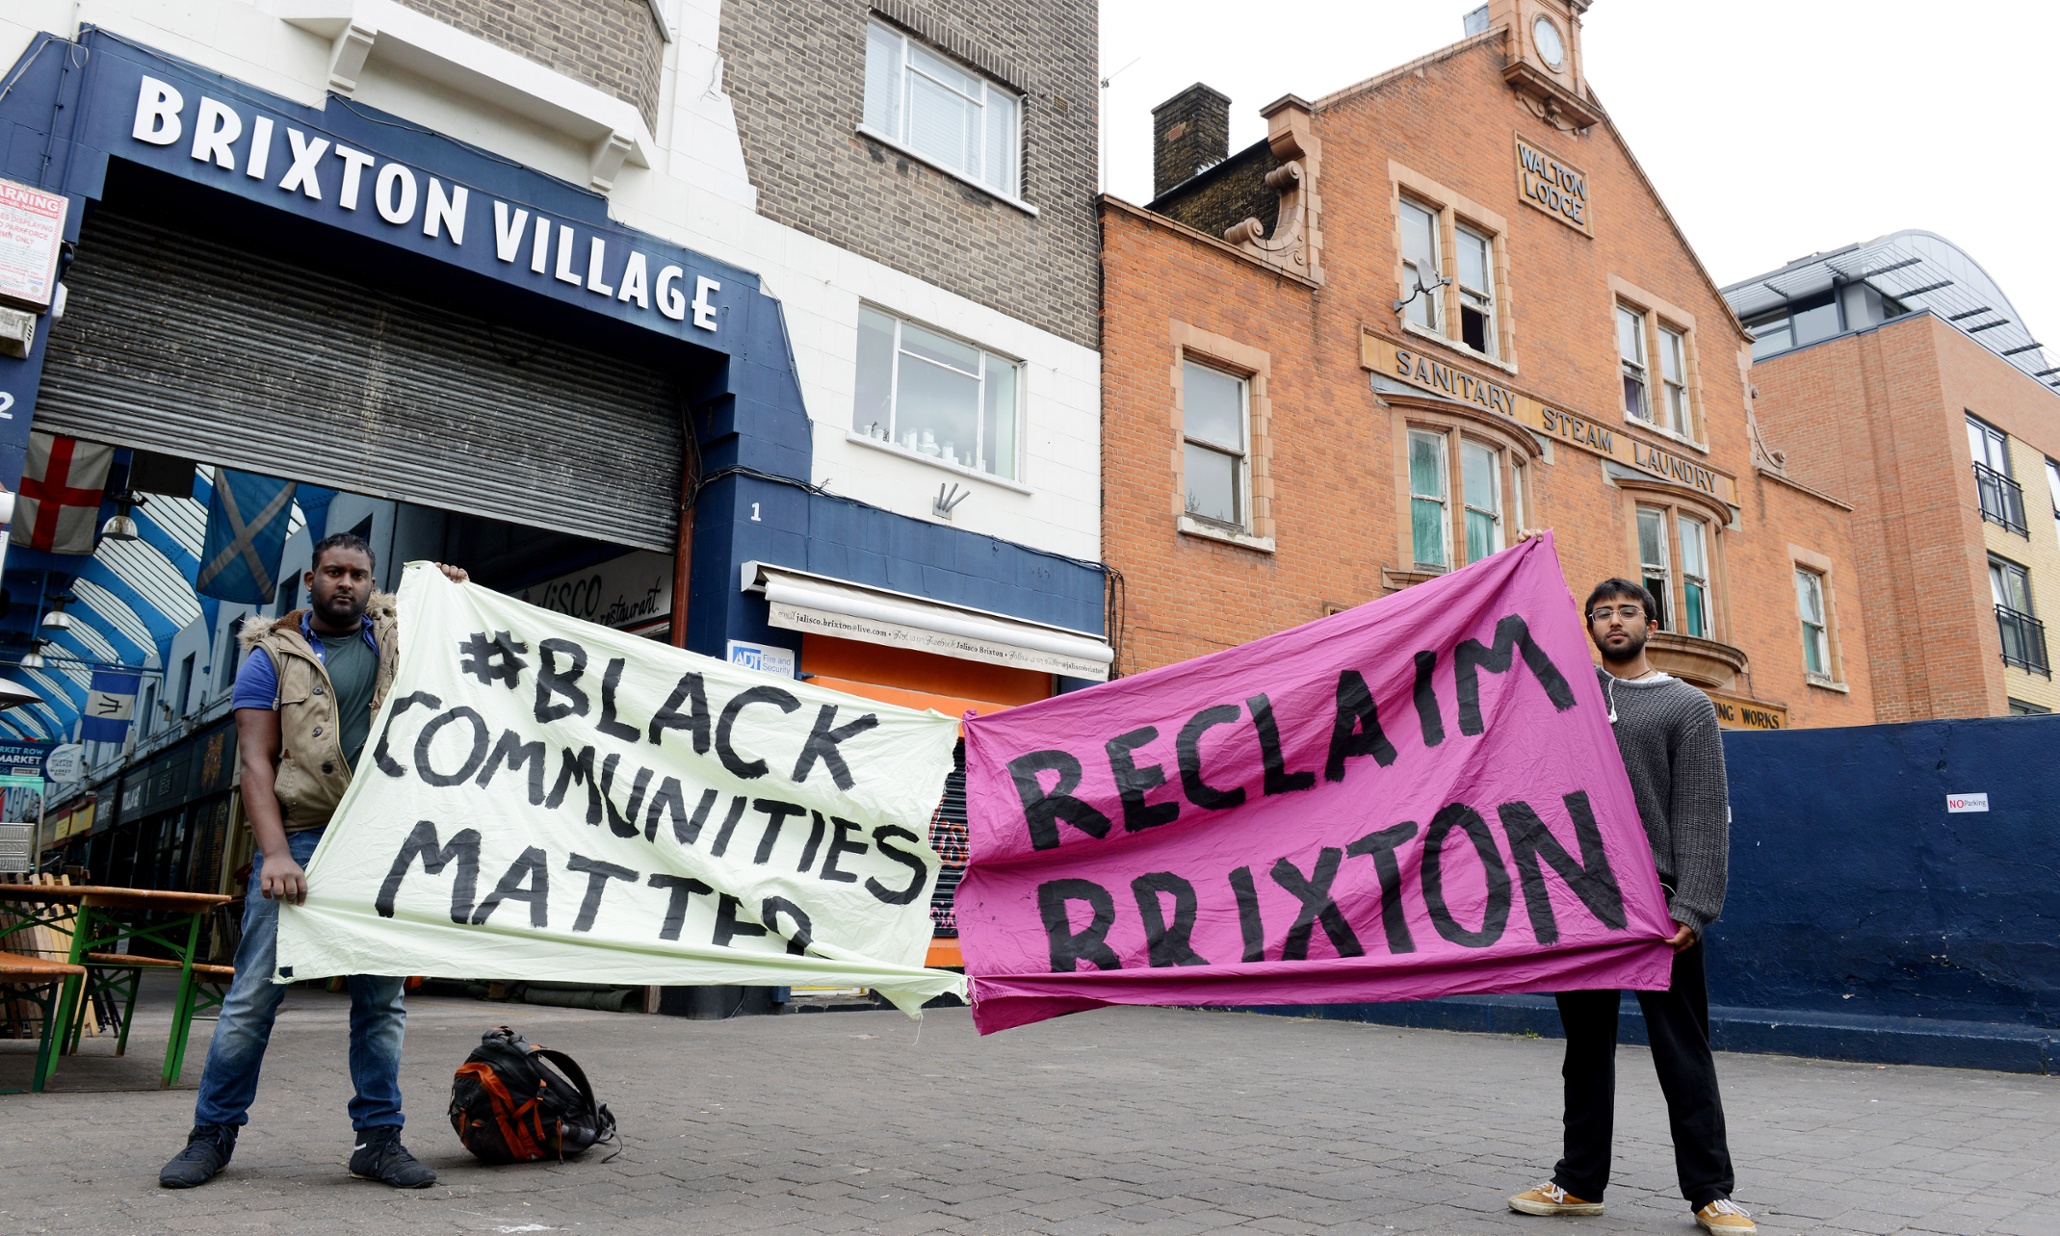 The gentrification of Brixton unites an eclectic group of protesters